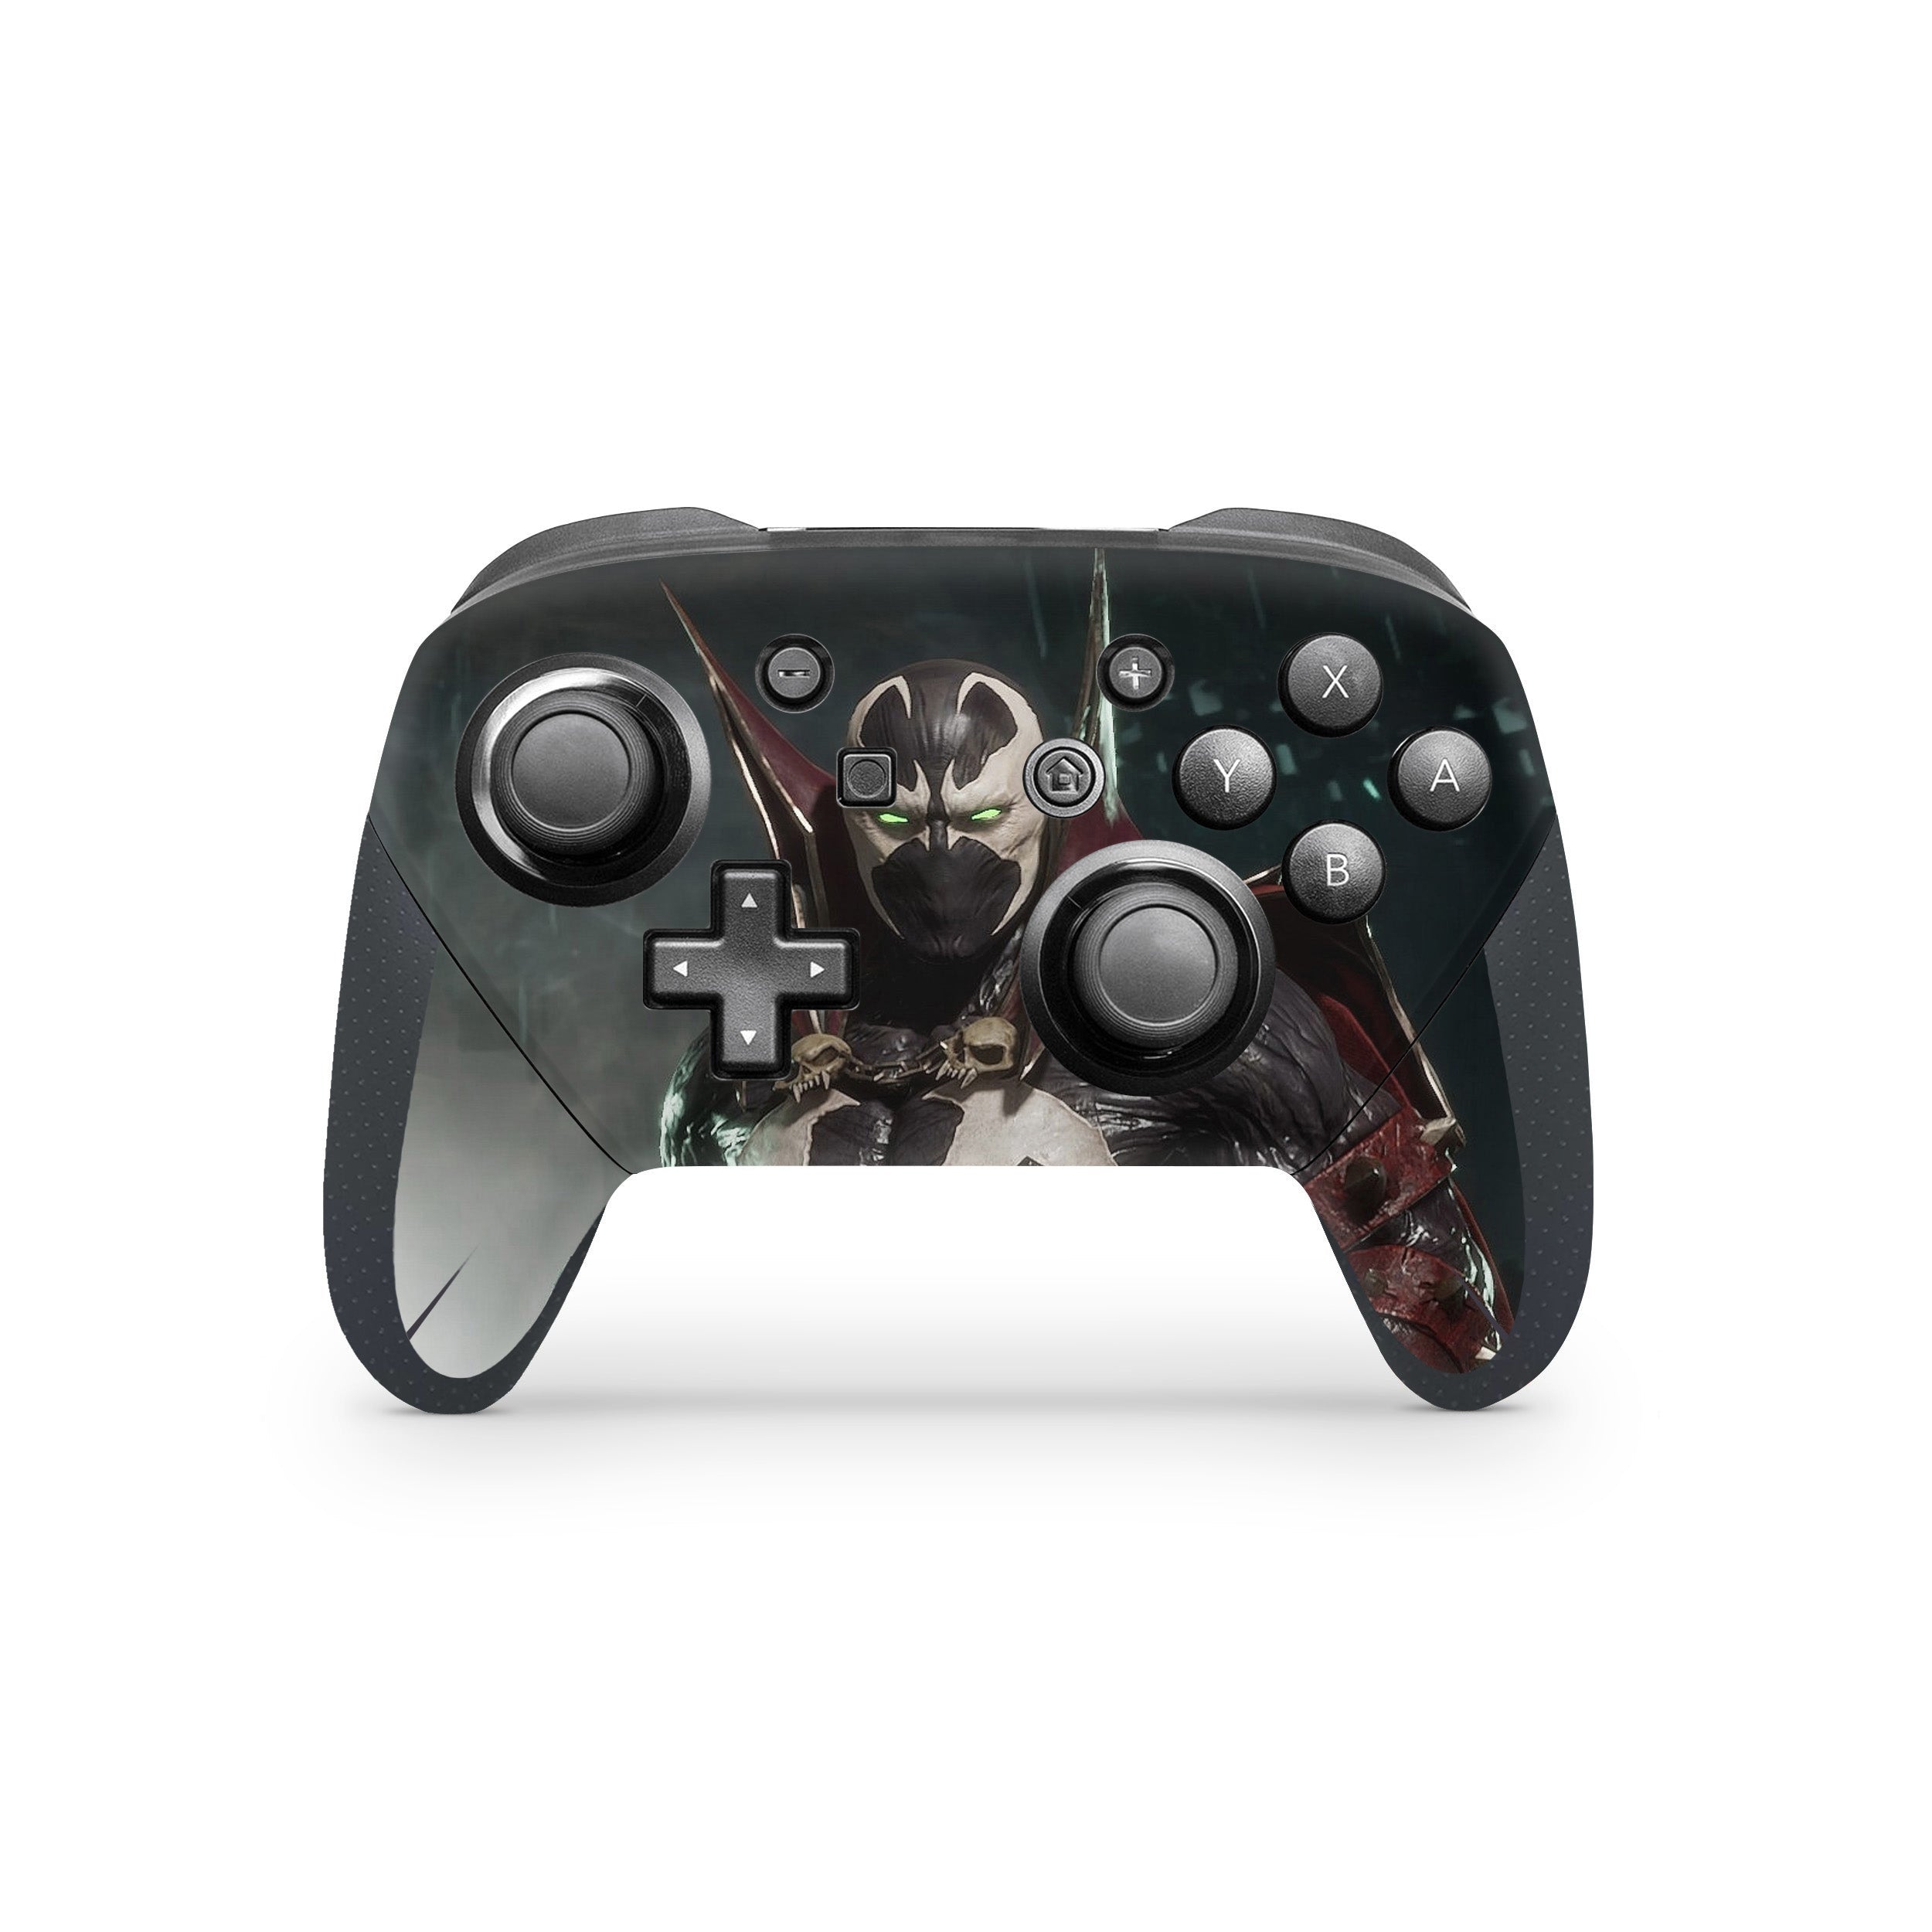 A video game skin featuring a Image Comics Spawn design for the Switch Pro Controller.